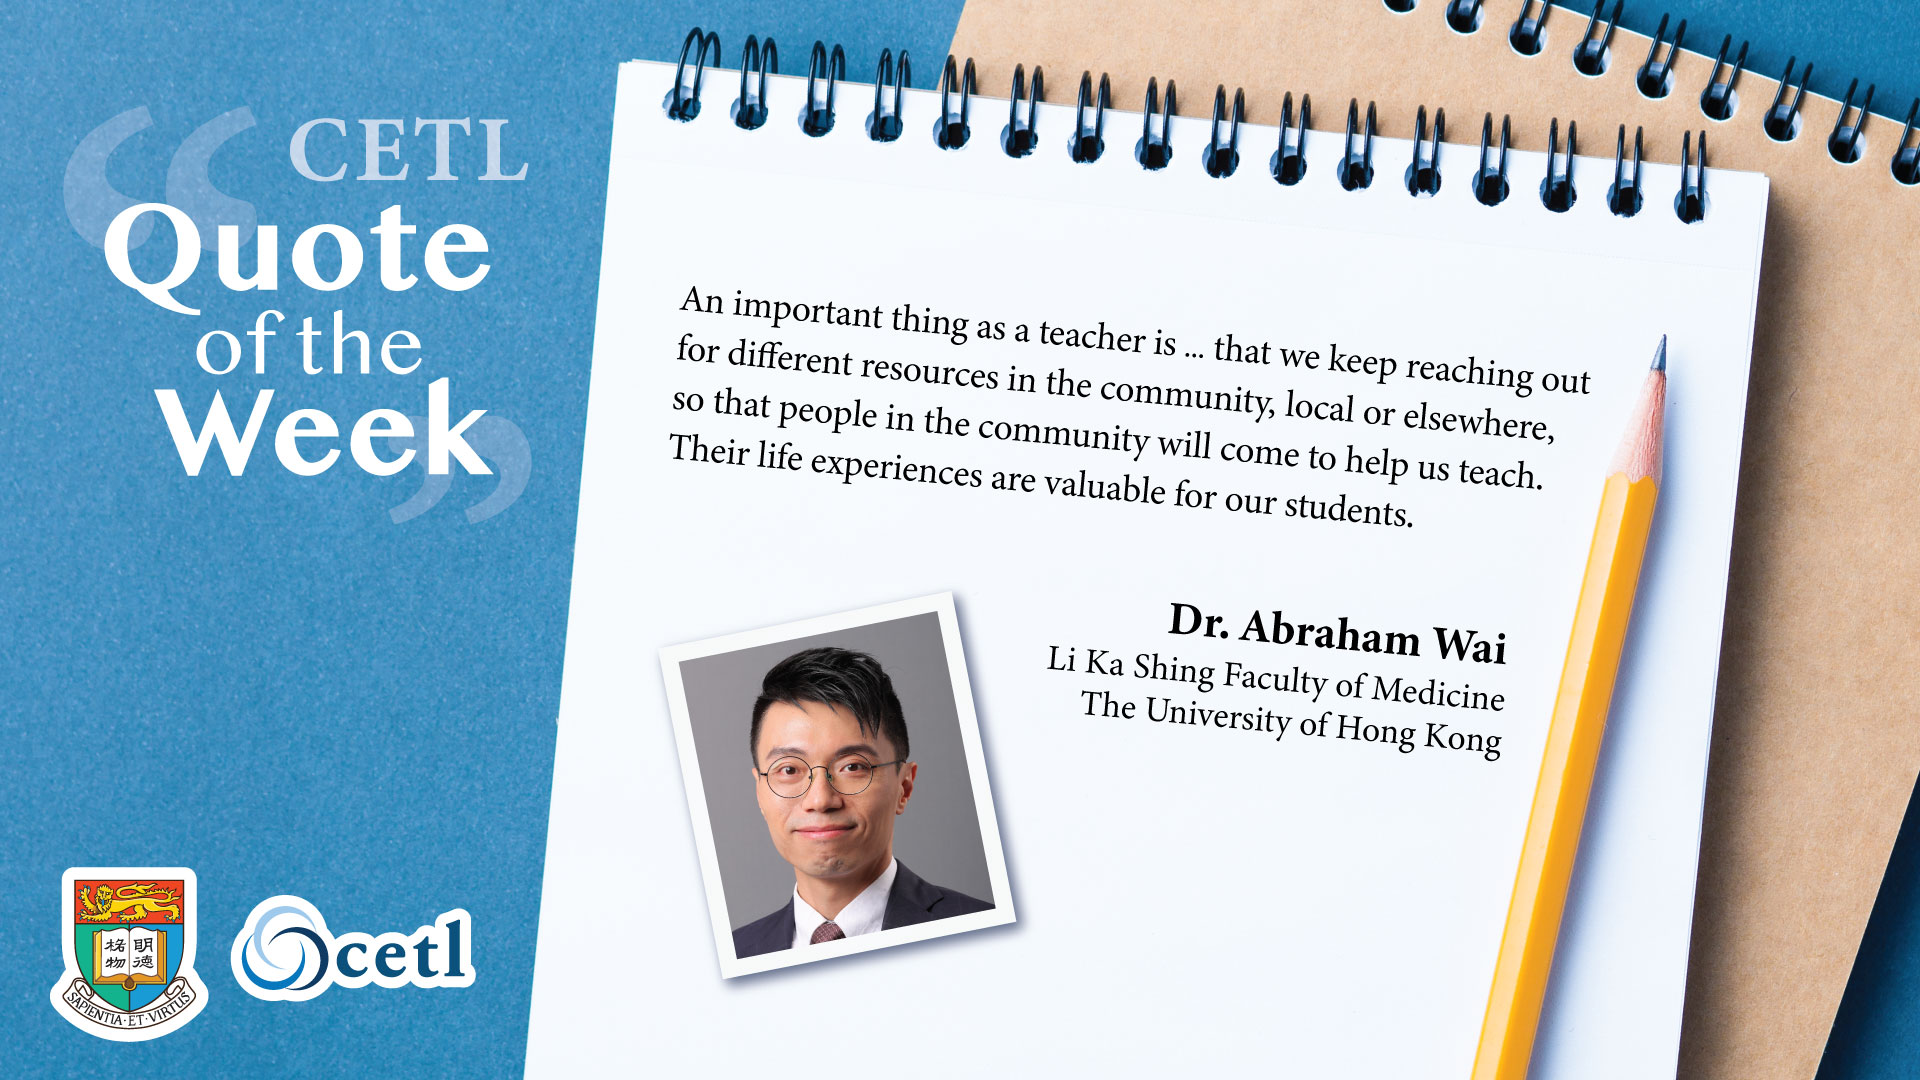 Dr. Abraham Wai - An important thing as a teacher is … that we keep reaching different resources in the community, local or elsewhere, so that people in the community will come to help us teach. Their life experiences are valuable for our students.